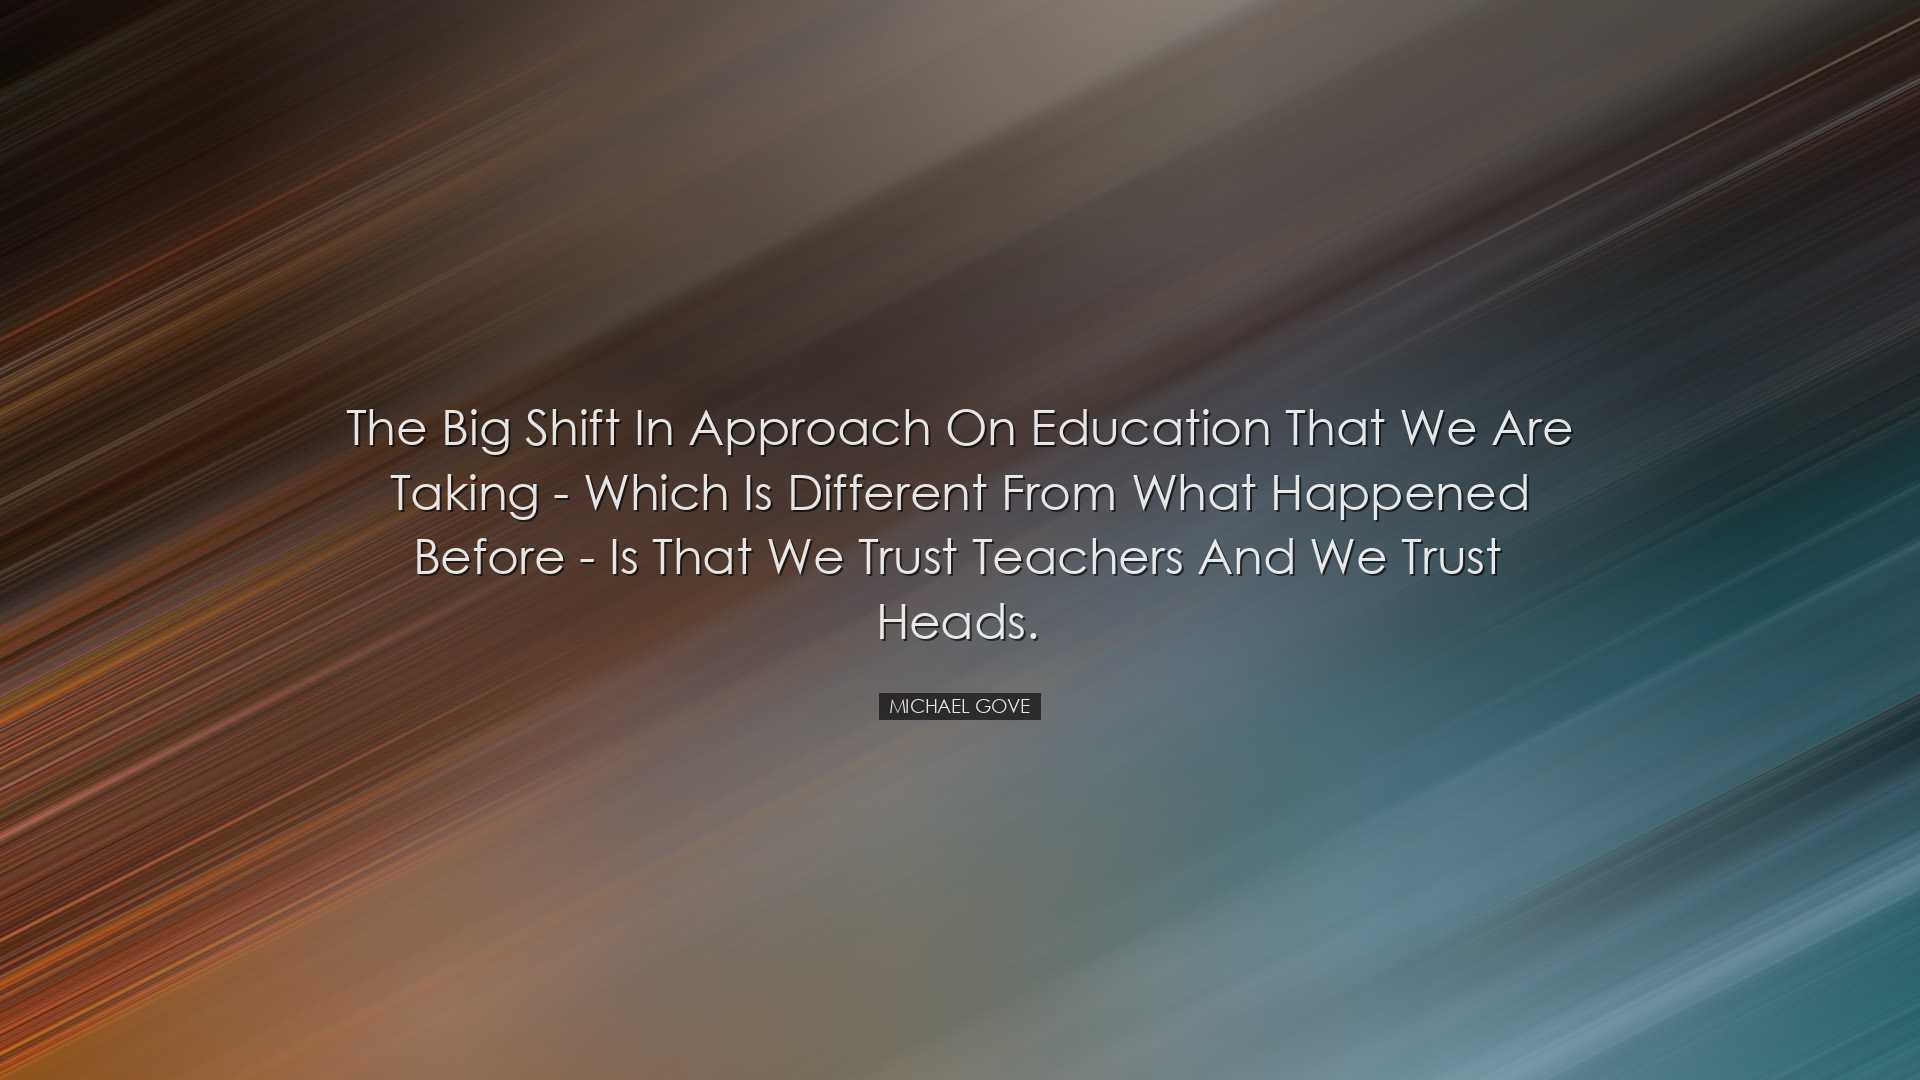 The big shift in approach on education that we are taking - which